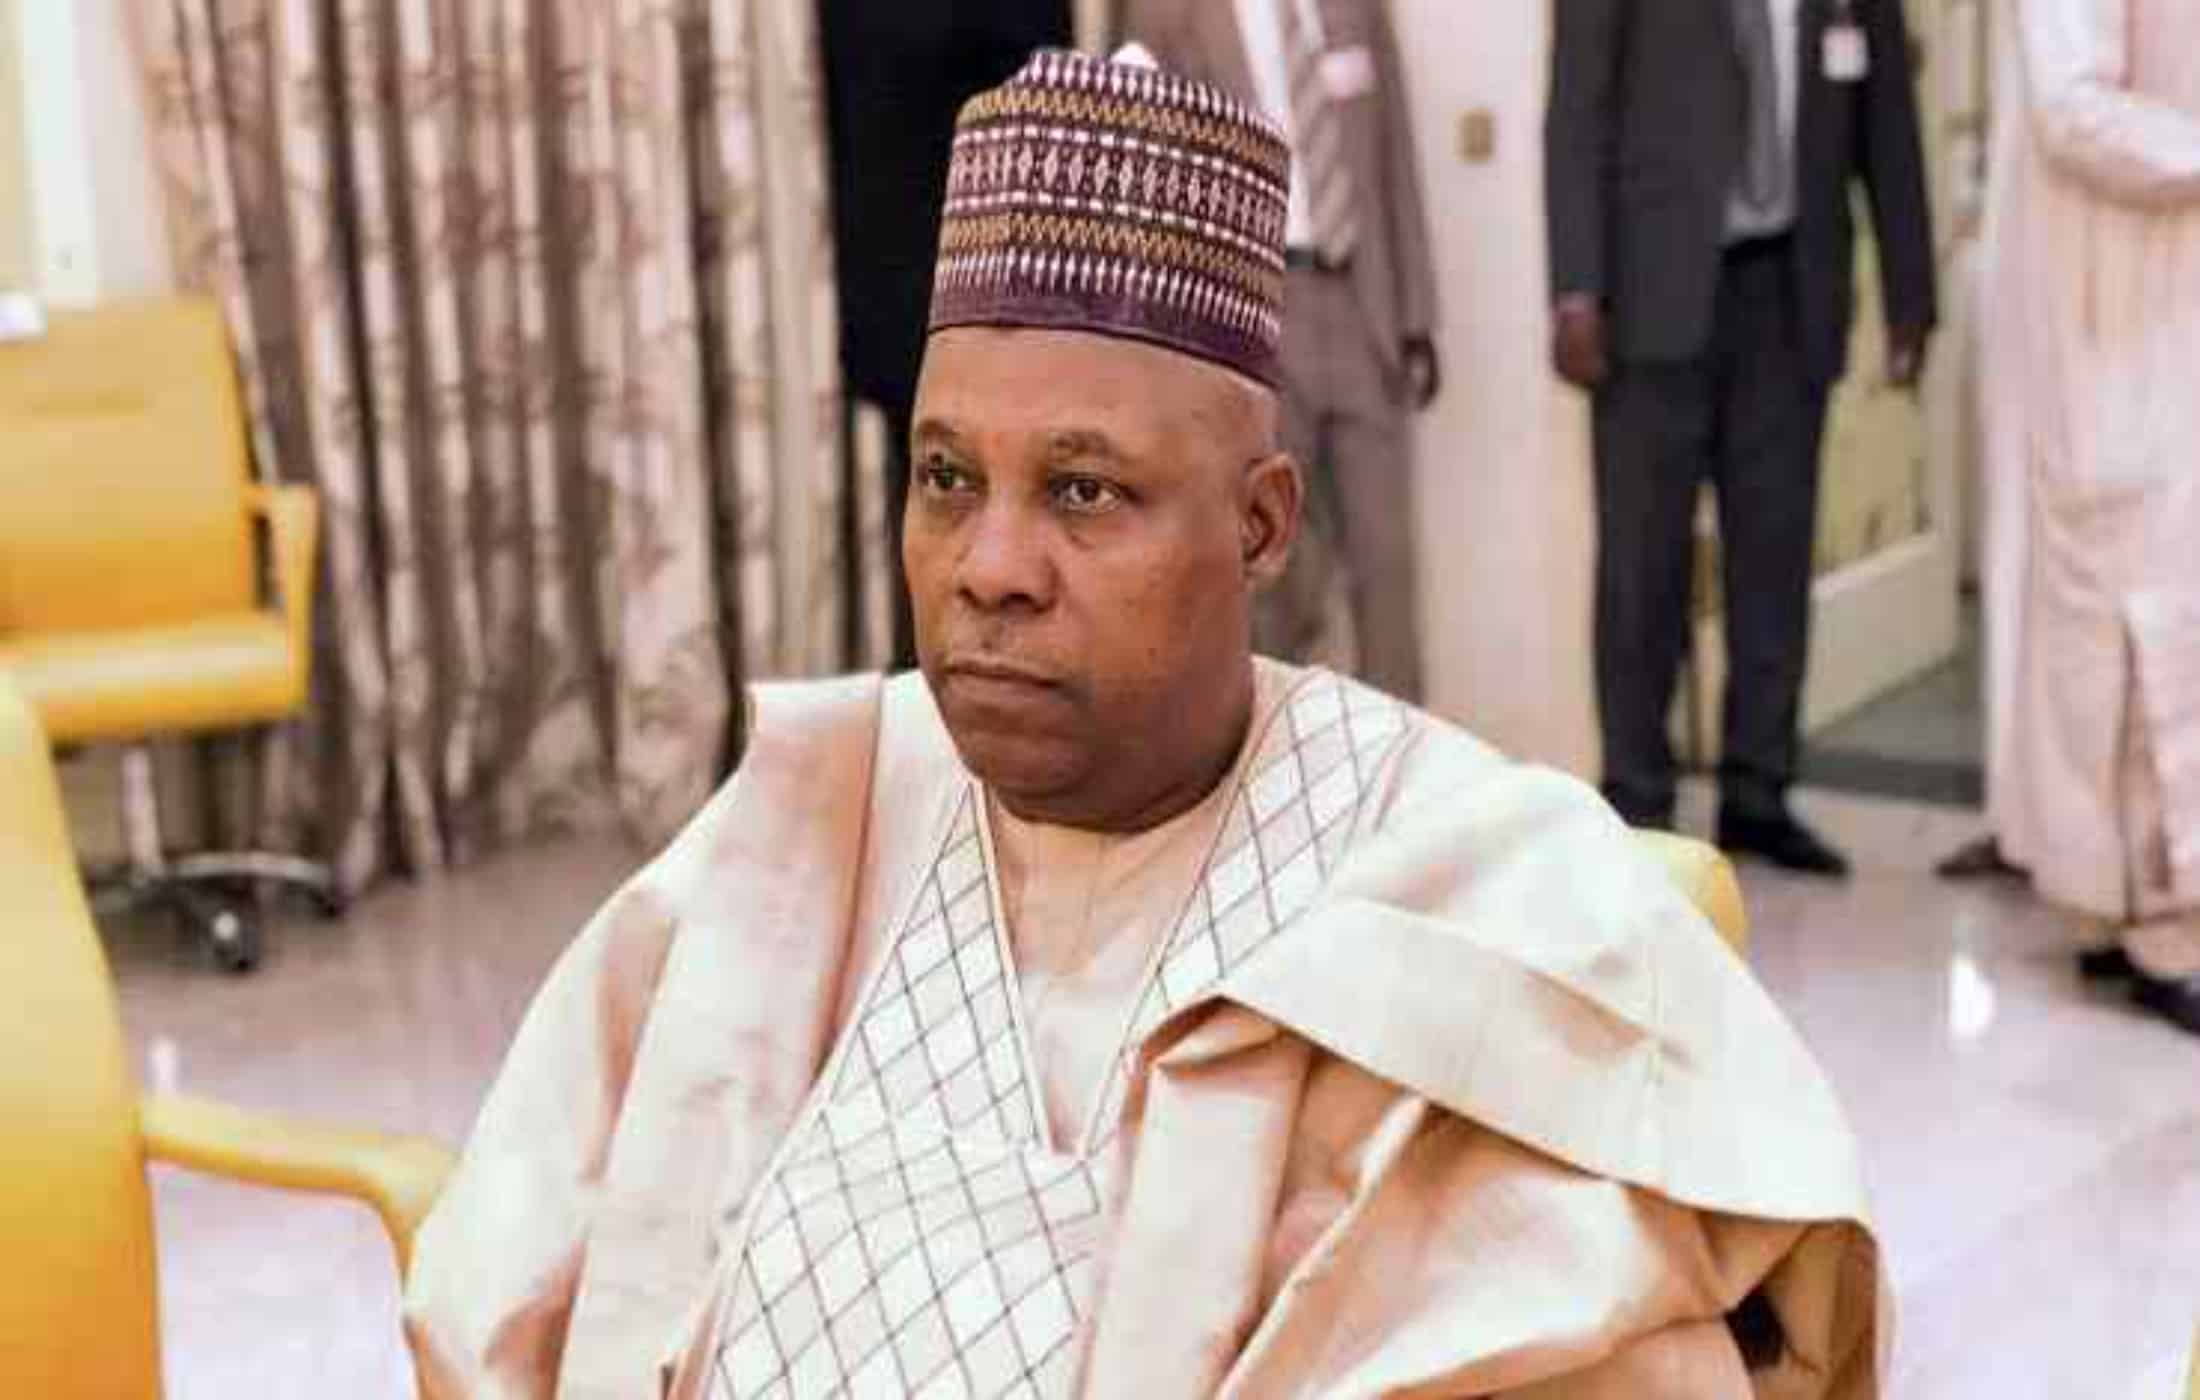 Let’s stay back and salvage Nigeria – Shettima tells resident doctors